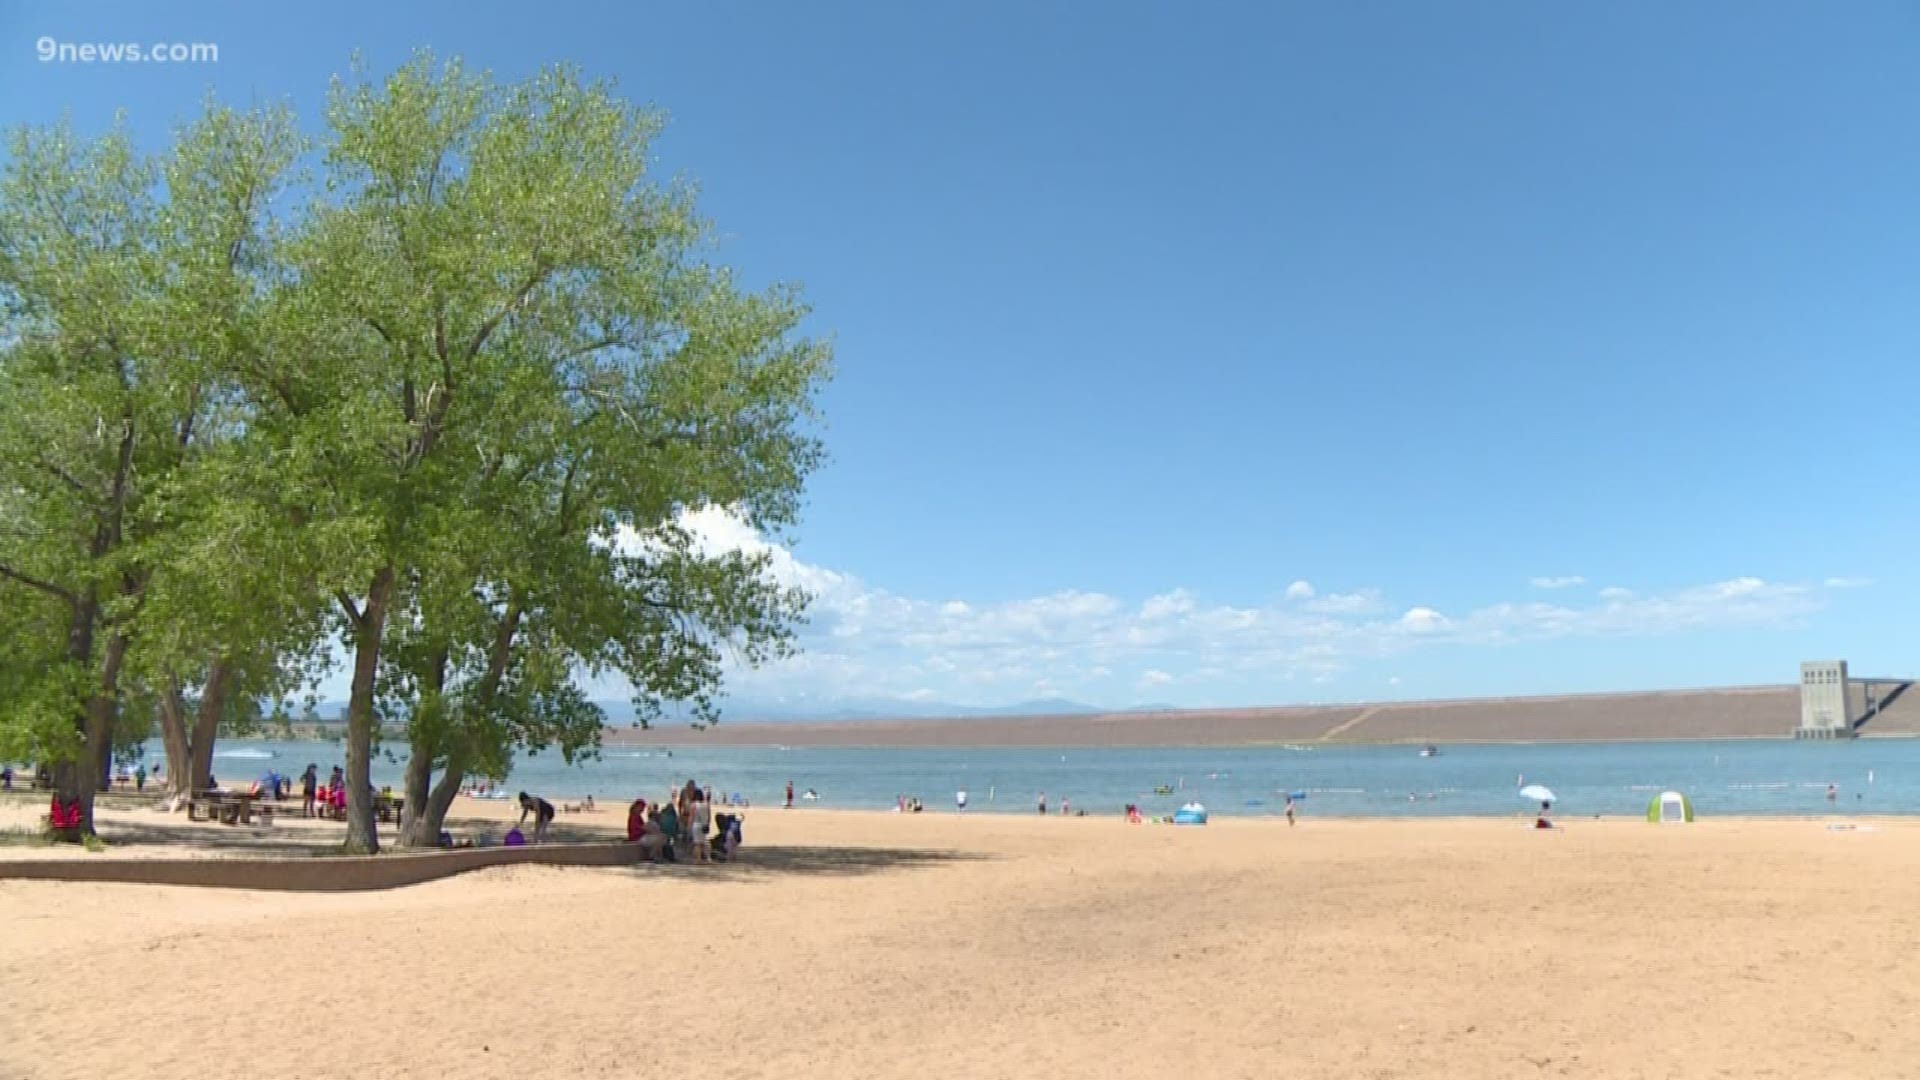 Nurse who helped save girl from Cherry Creek Reservoir says it was